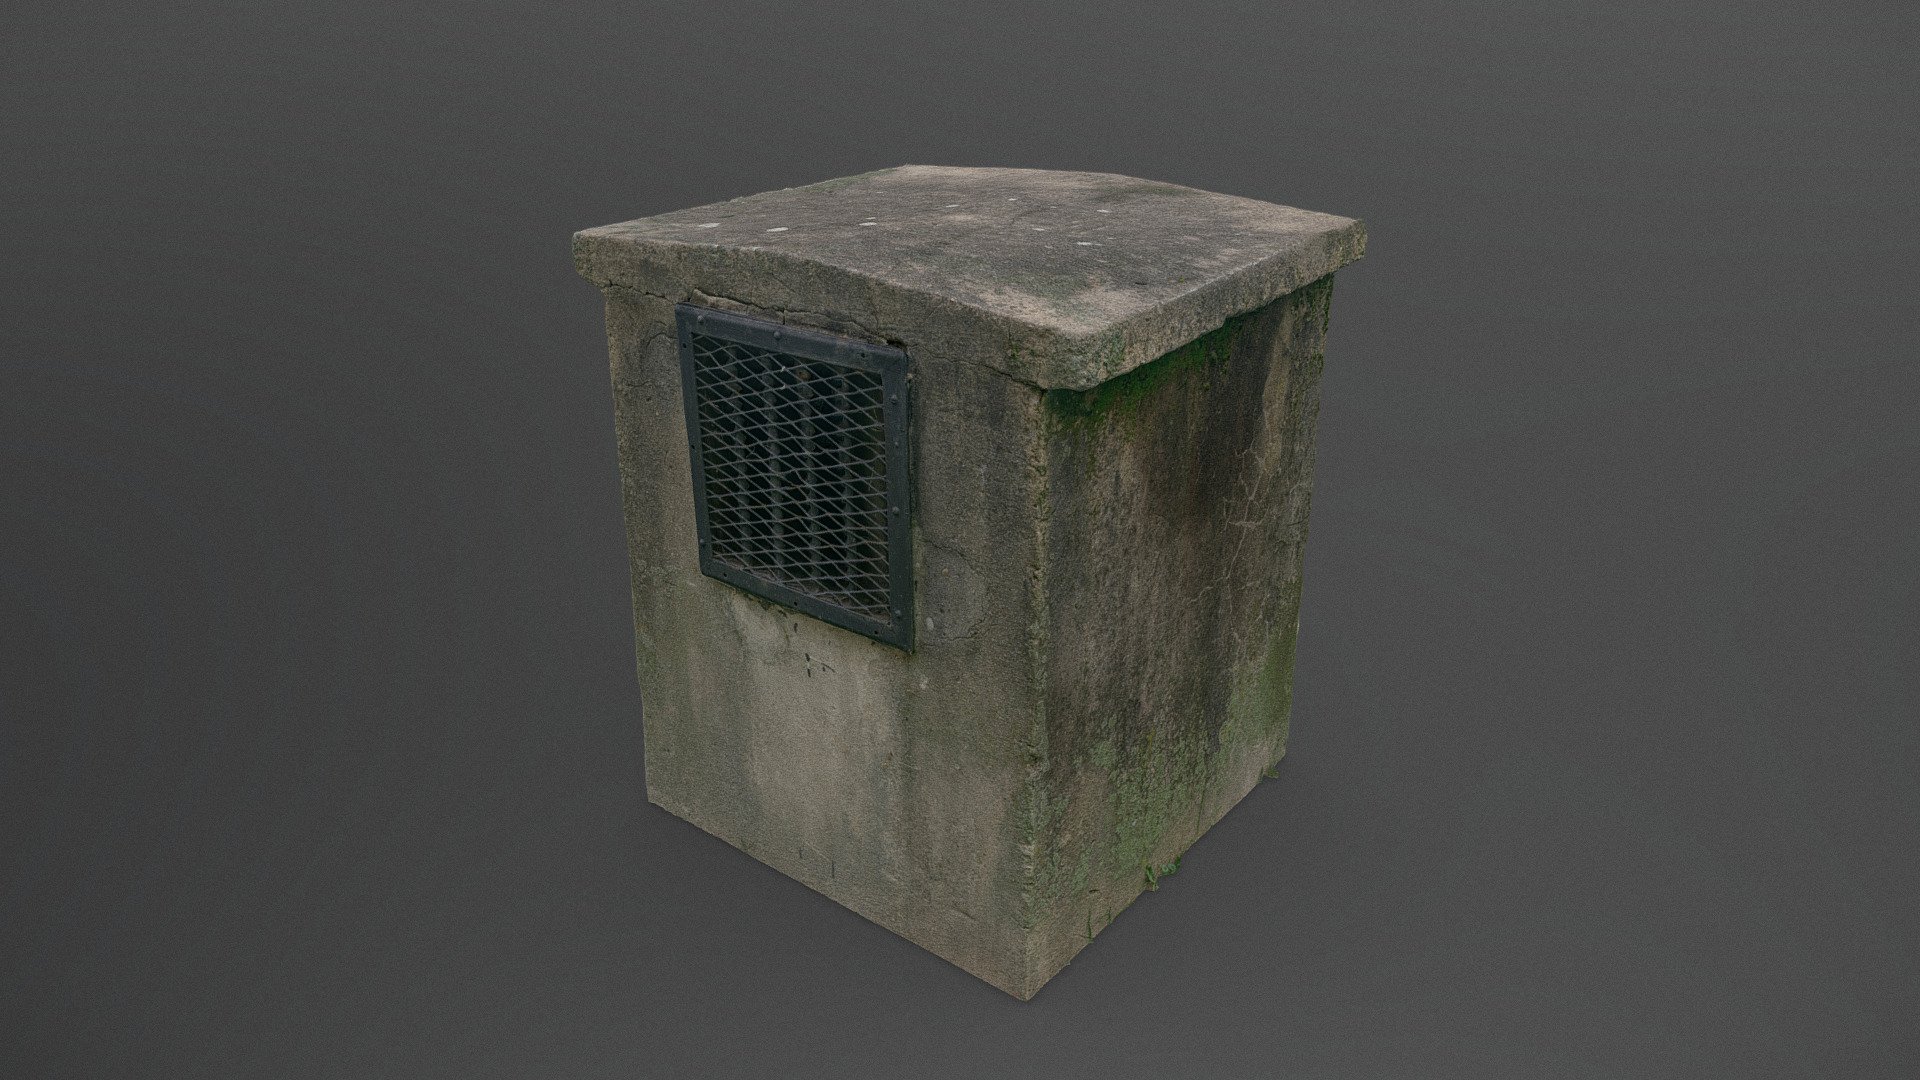 Steam exhaust concrete housing withmetal fan grid, vintage old east europe city pipeline network

Photogrammetry scan 160x36MP, 2x8K texture - Heating steam exhaust - Buy Royalty Free 3D model by matousekfoto 3d model